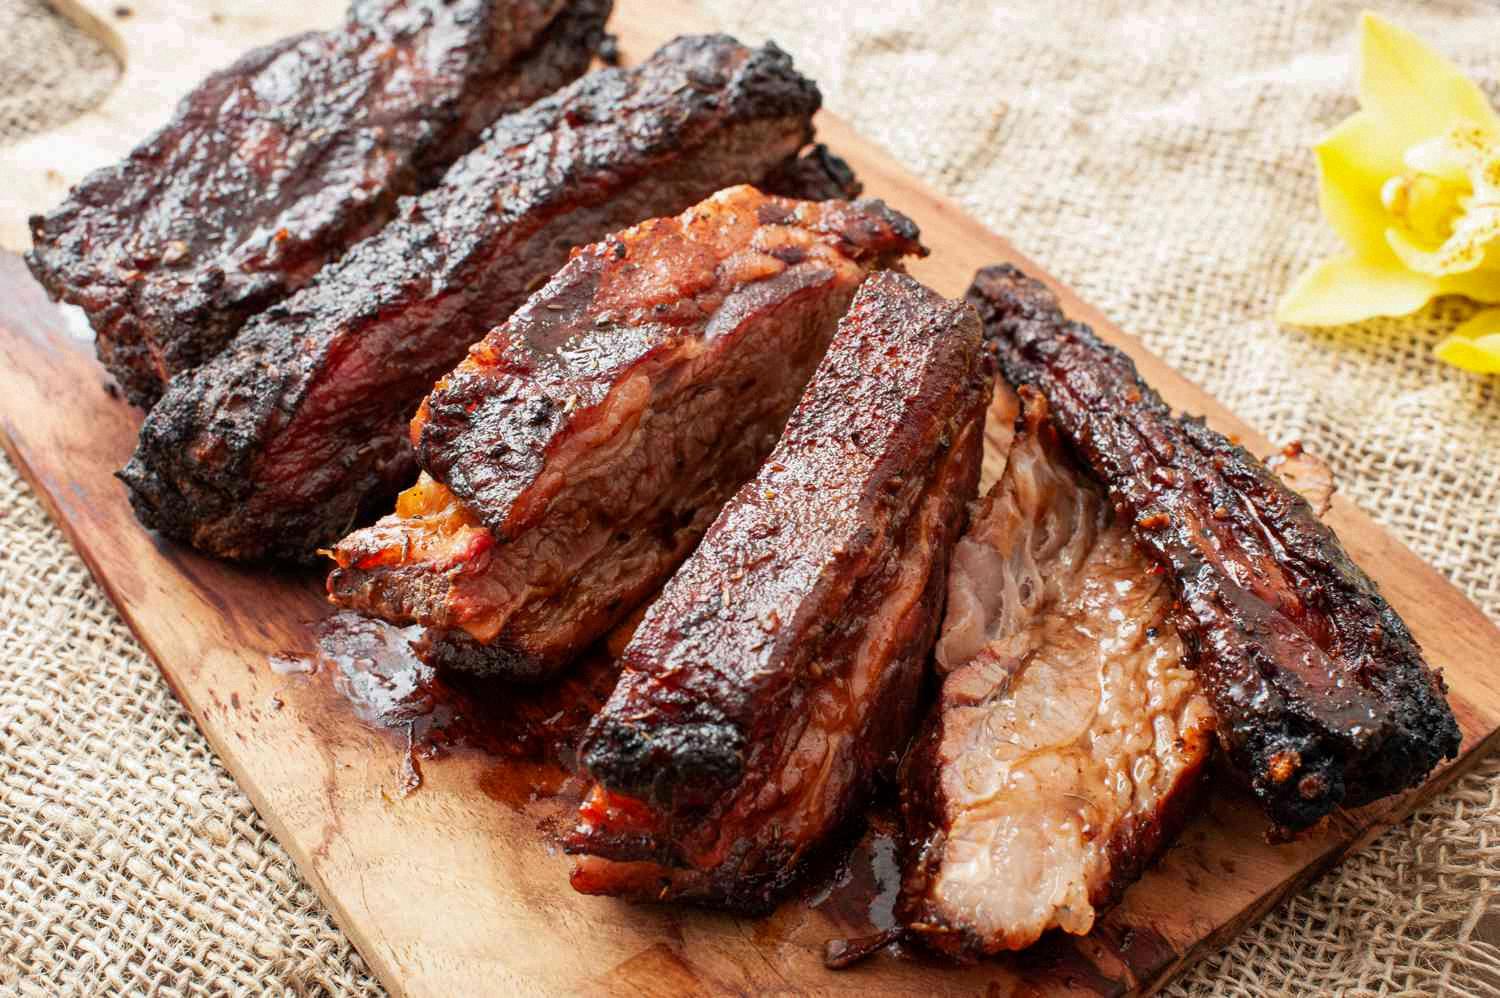 are short ribs beef or pork